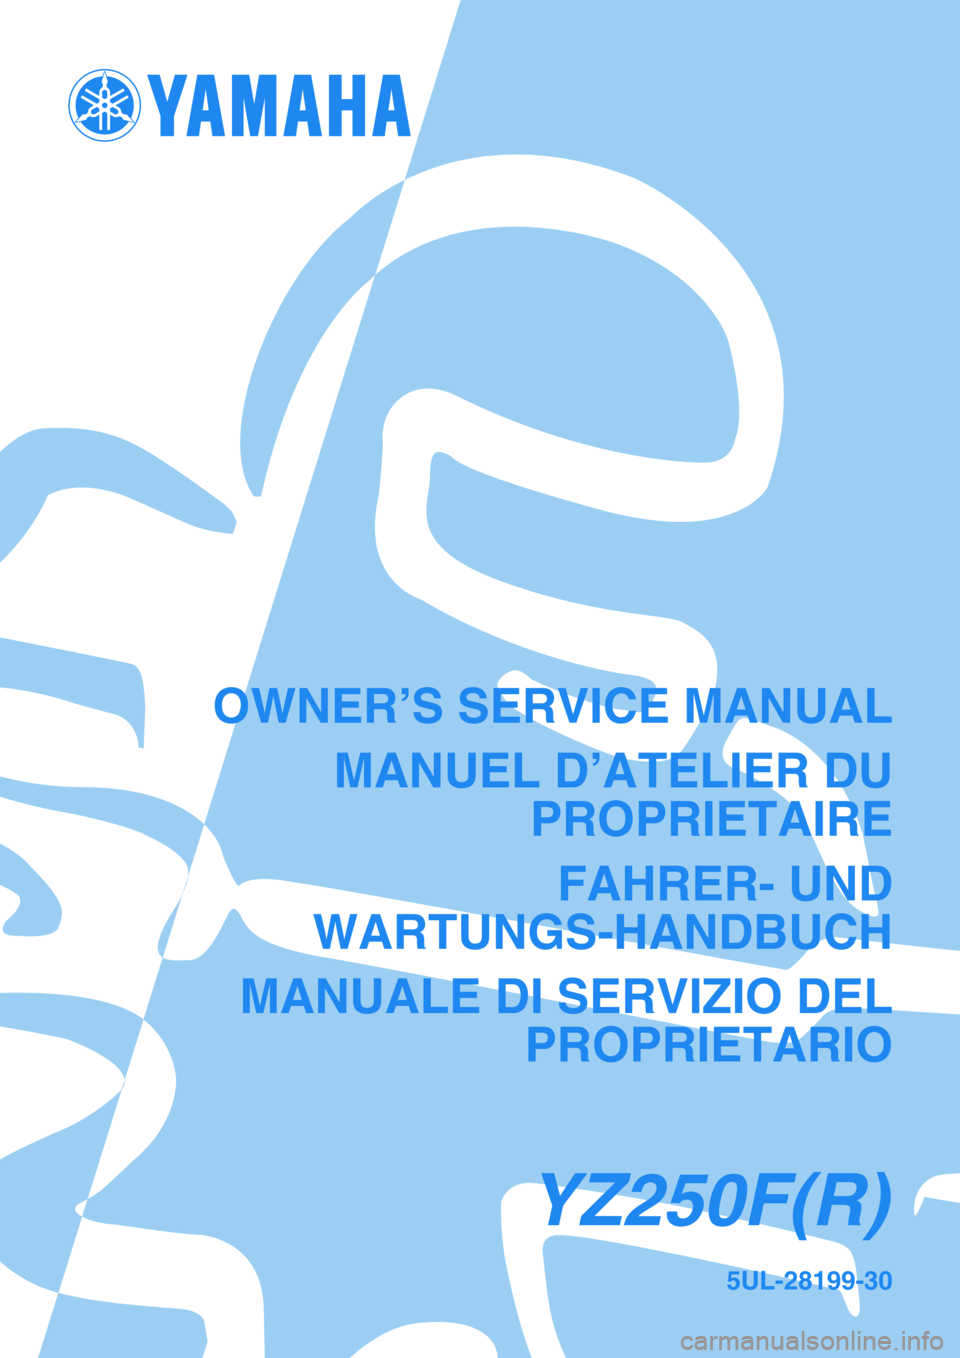 YAMAHA YZ250F 2003  Notices Demploi (in French) 5UL-28199-30
YZ250F(R)
OWNER’S SERVICE MANUAL
MANUEL D’ATELIER DU
PROPRIETAIRE
FAHRER- UND
WARTUNGS-HANDBUCH
MANUALE DI SERVIZIO DEL
PROPRIETARIO 